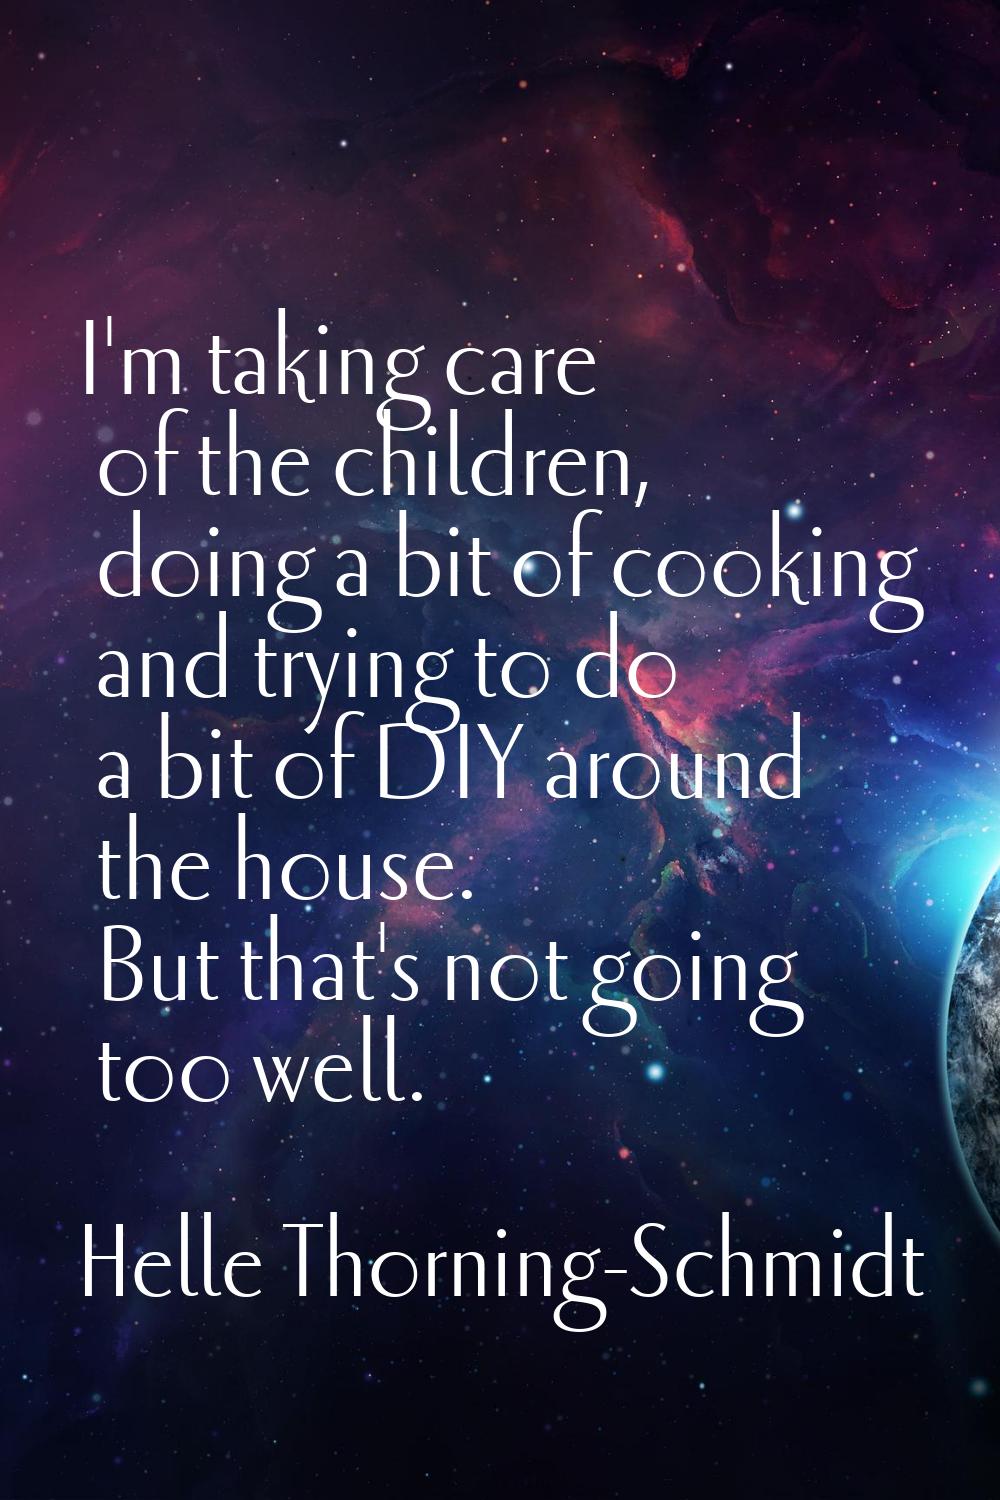 I'm taking care of the children, doing a bit of cooking and trying to do a bit of DIY around the ho